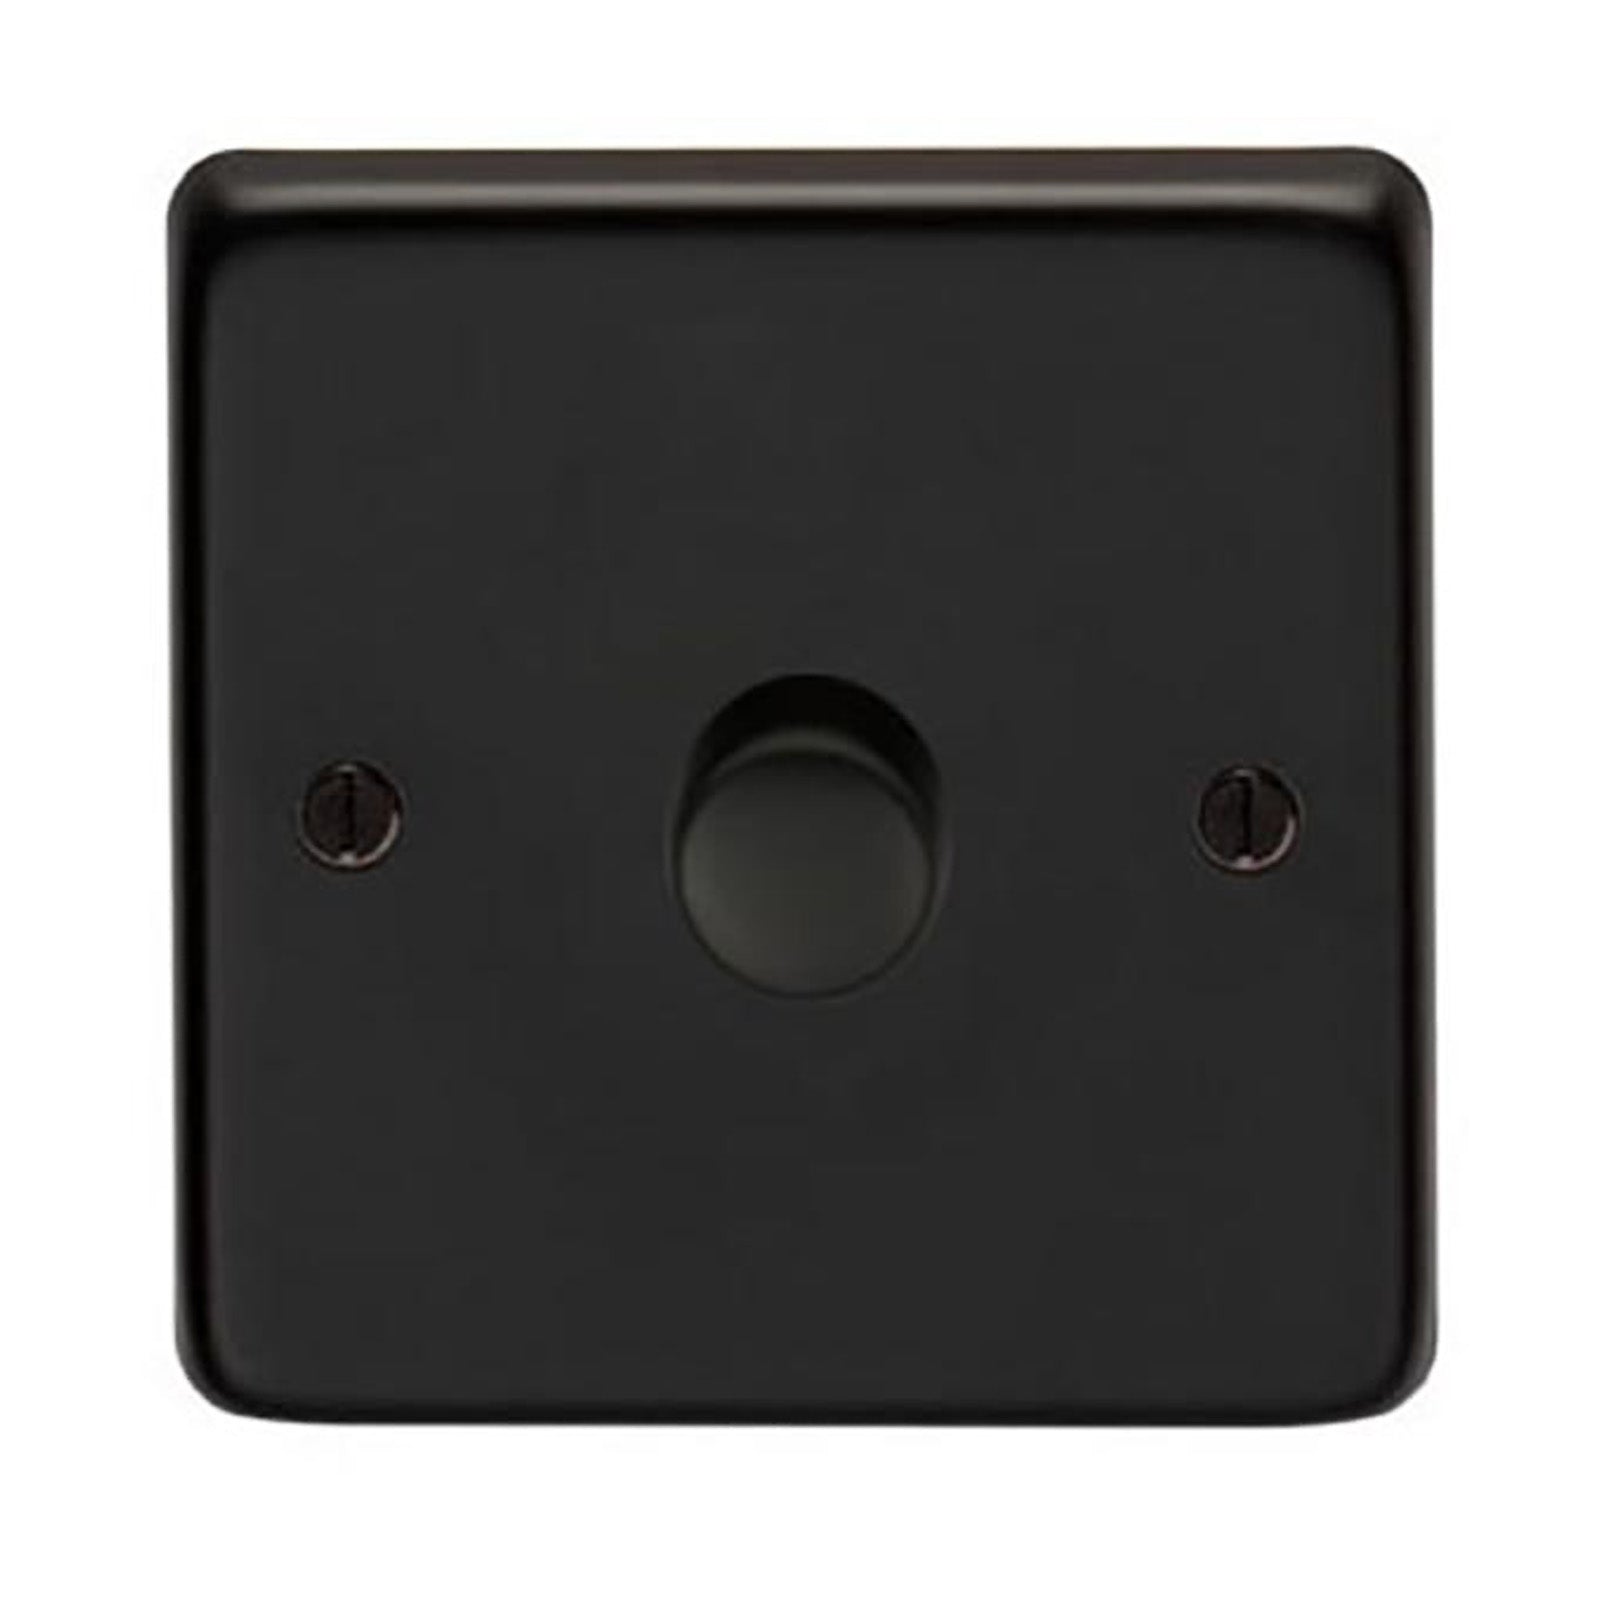 SHOW Image of Single LED Dimmer Switch with Matt Black finish